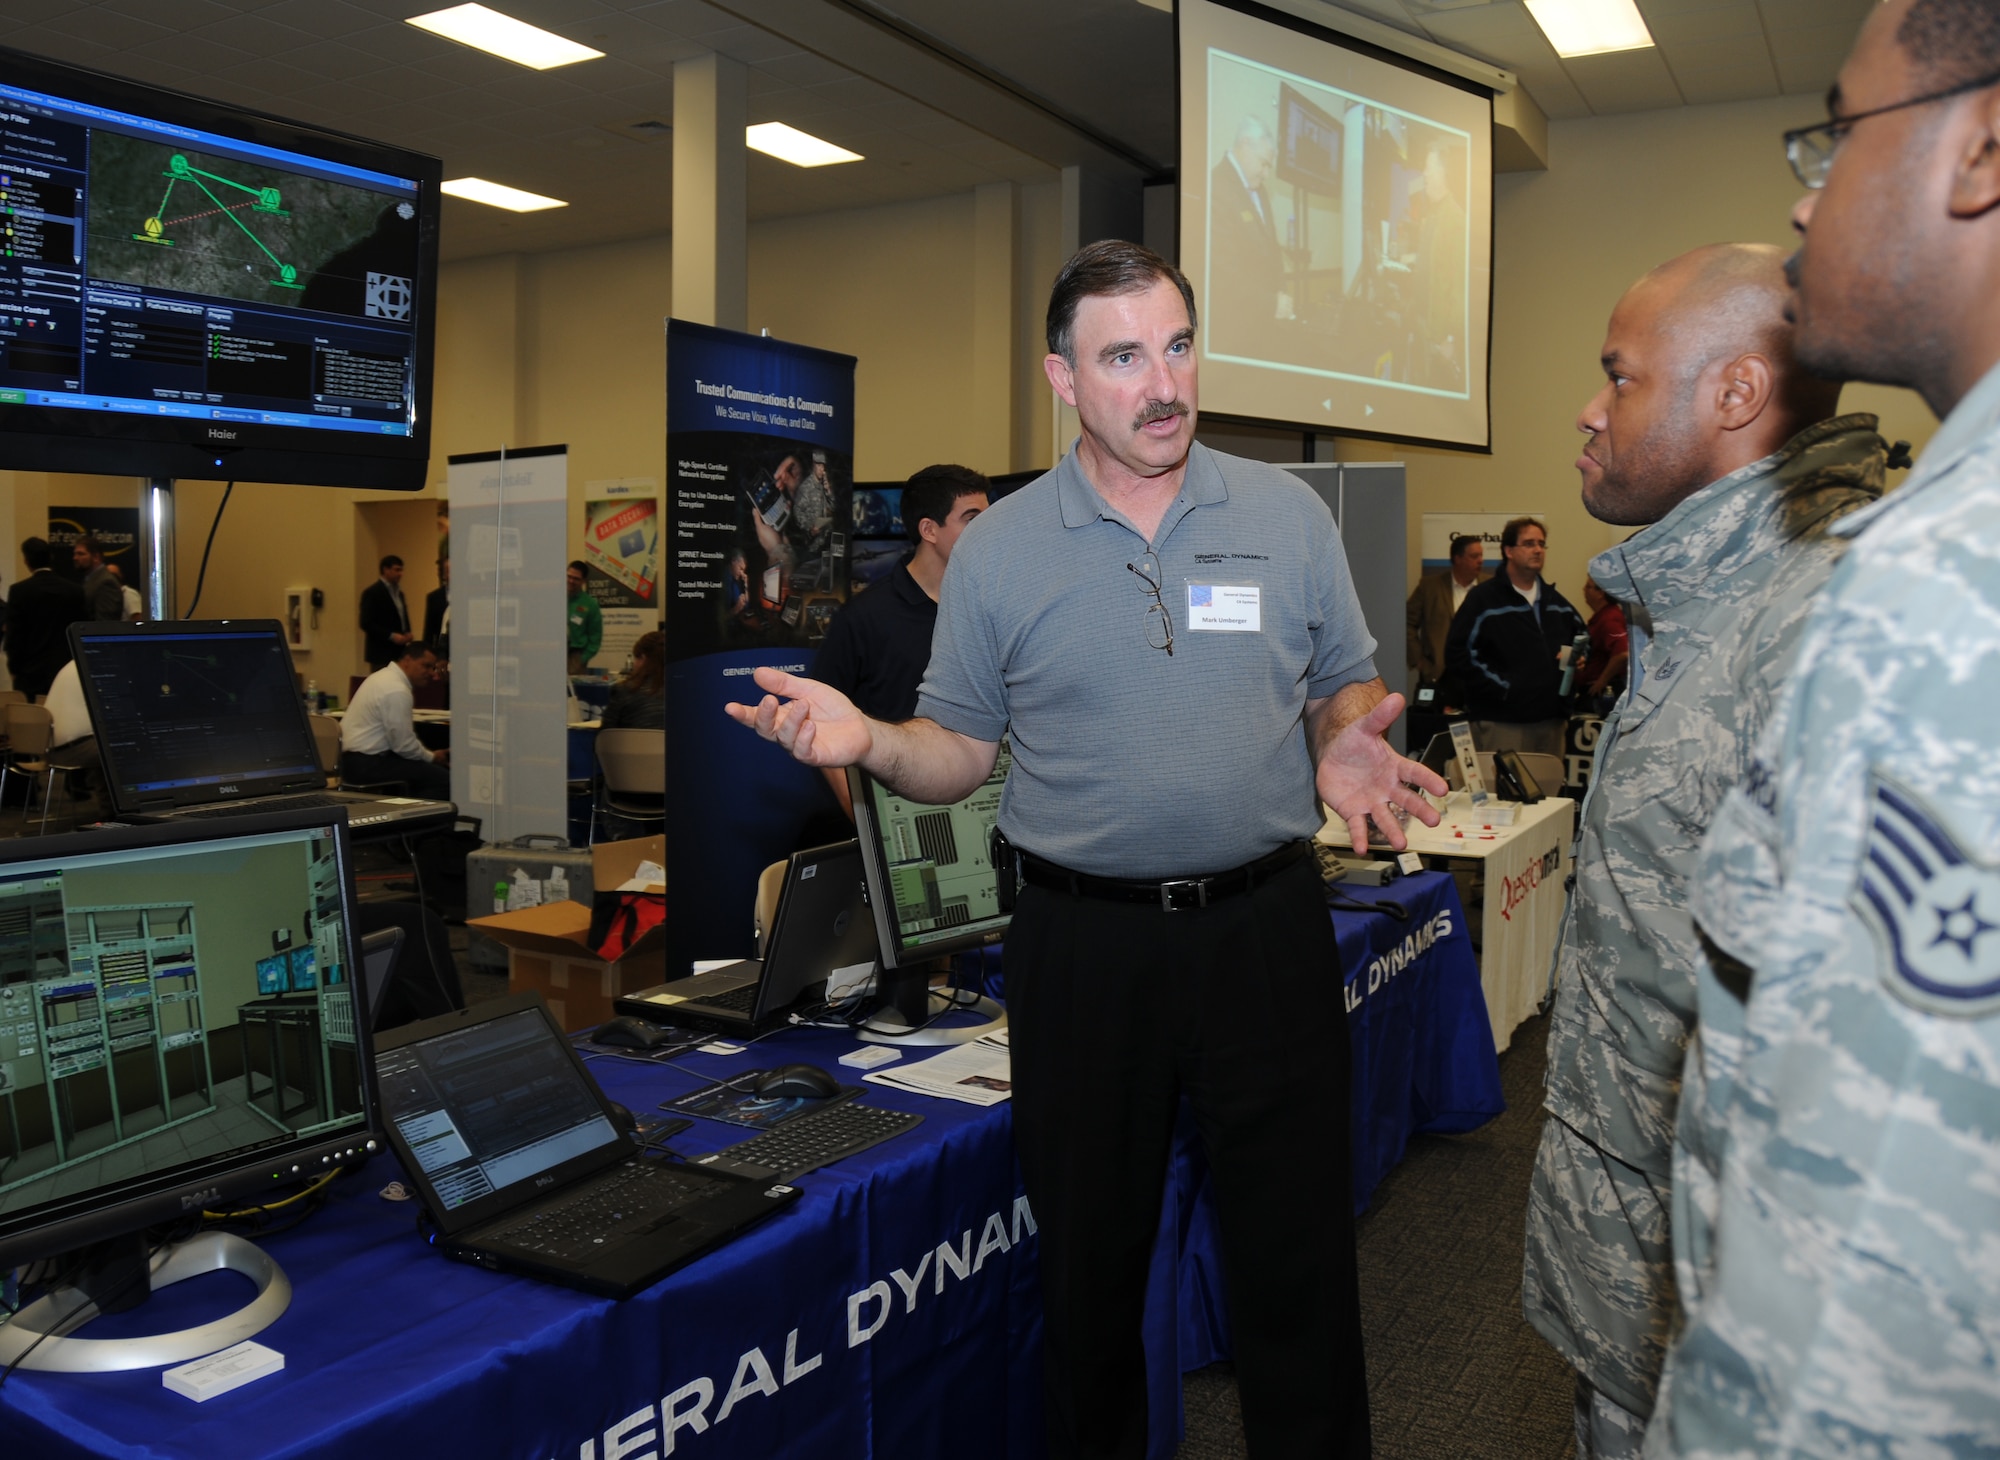 Mark Umberger, General Dynamics business development manager, provides a demonstration on network-centric training for networks and equipment to Tech Sgt. Doug Dredden, 336th Training Squadron, and Staff Sgt. Vincent Callahan, 81st Training Support Squadron, during a technology expo Jan. 9, 2012, at the Roberts Consolidated Aircraft Maintenance Facility, Keesler Air Force Base, Miss.  The 17th annual free expo, hosted by the 81st TRSS, featured more than 40 exhibitors.  (U.S. Air Force photo by Kemberly Groue)